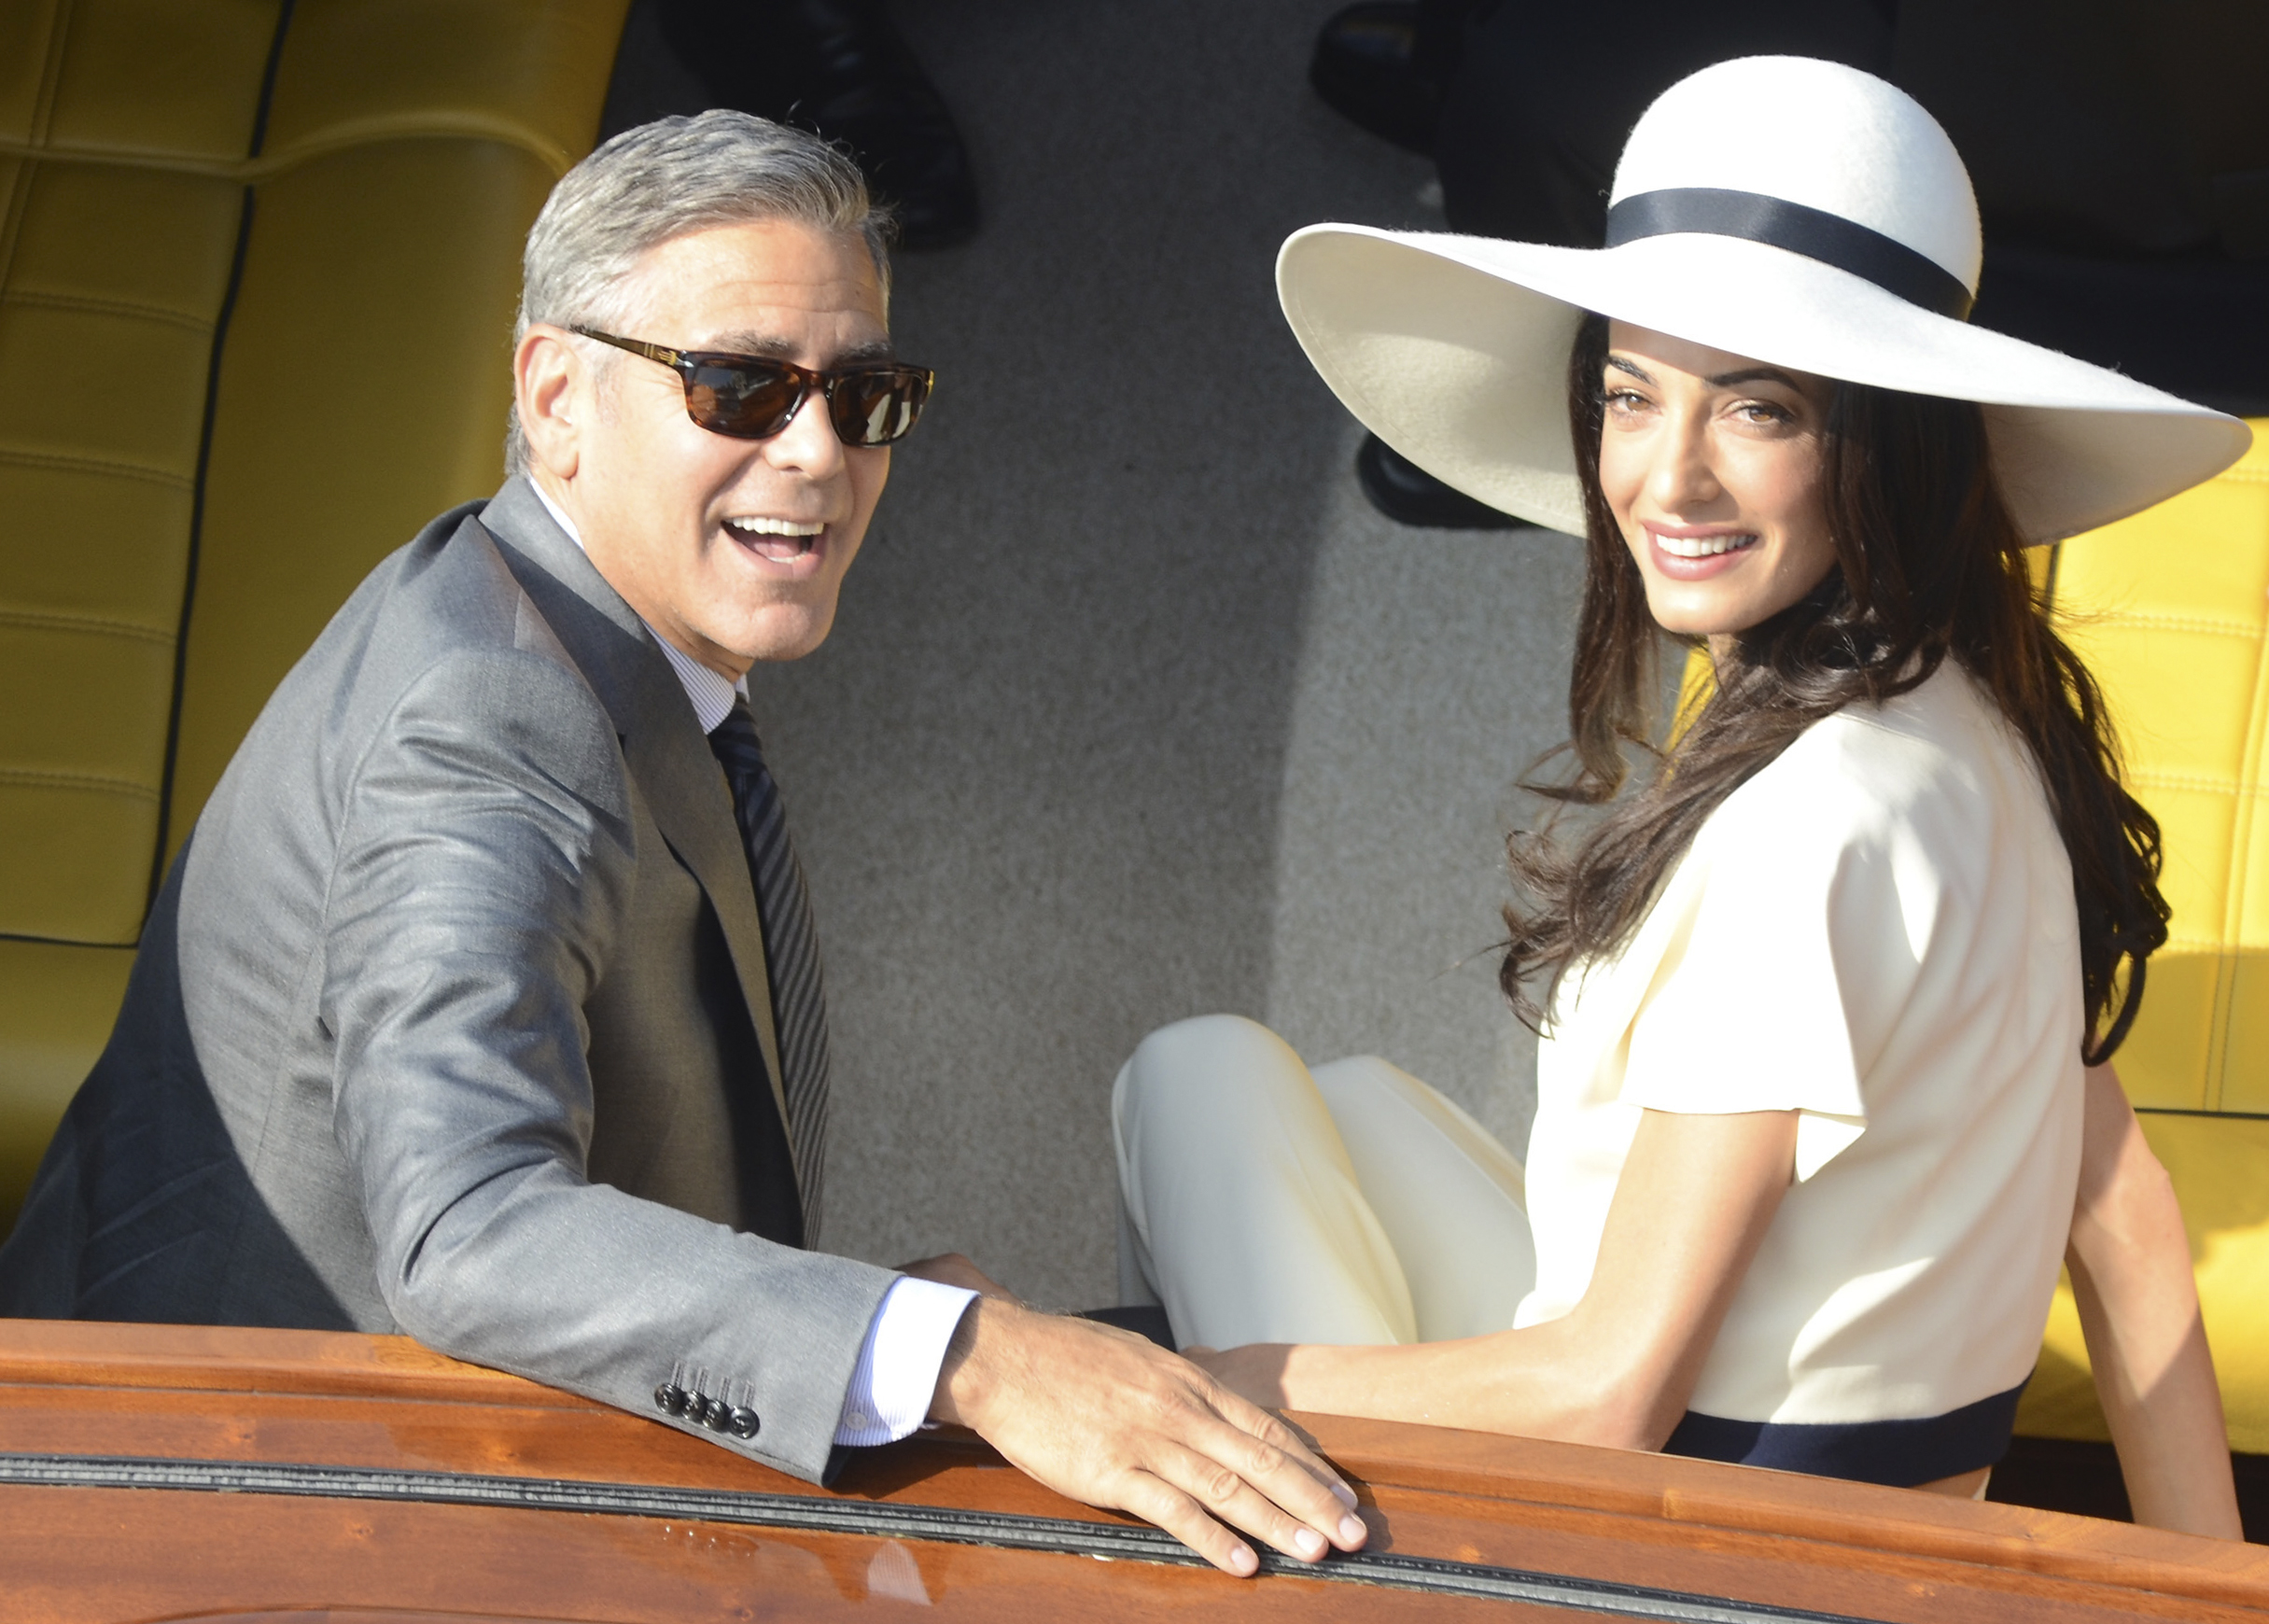 George Clooney and his wife Amal Alamuddin leave the city hall after their civil marriage ceremony in Venice, Italy, (Luigi Costantini—AP)